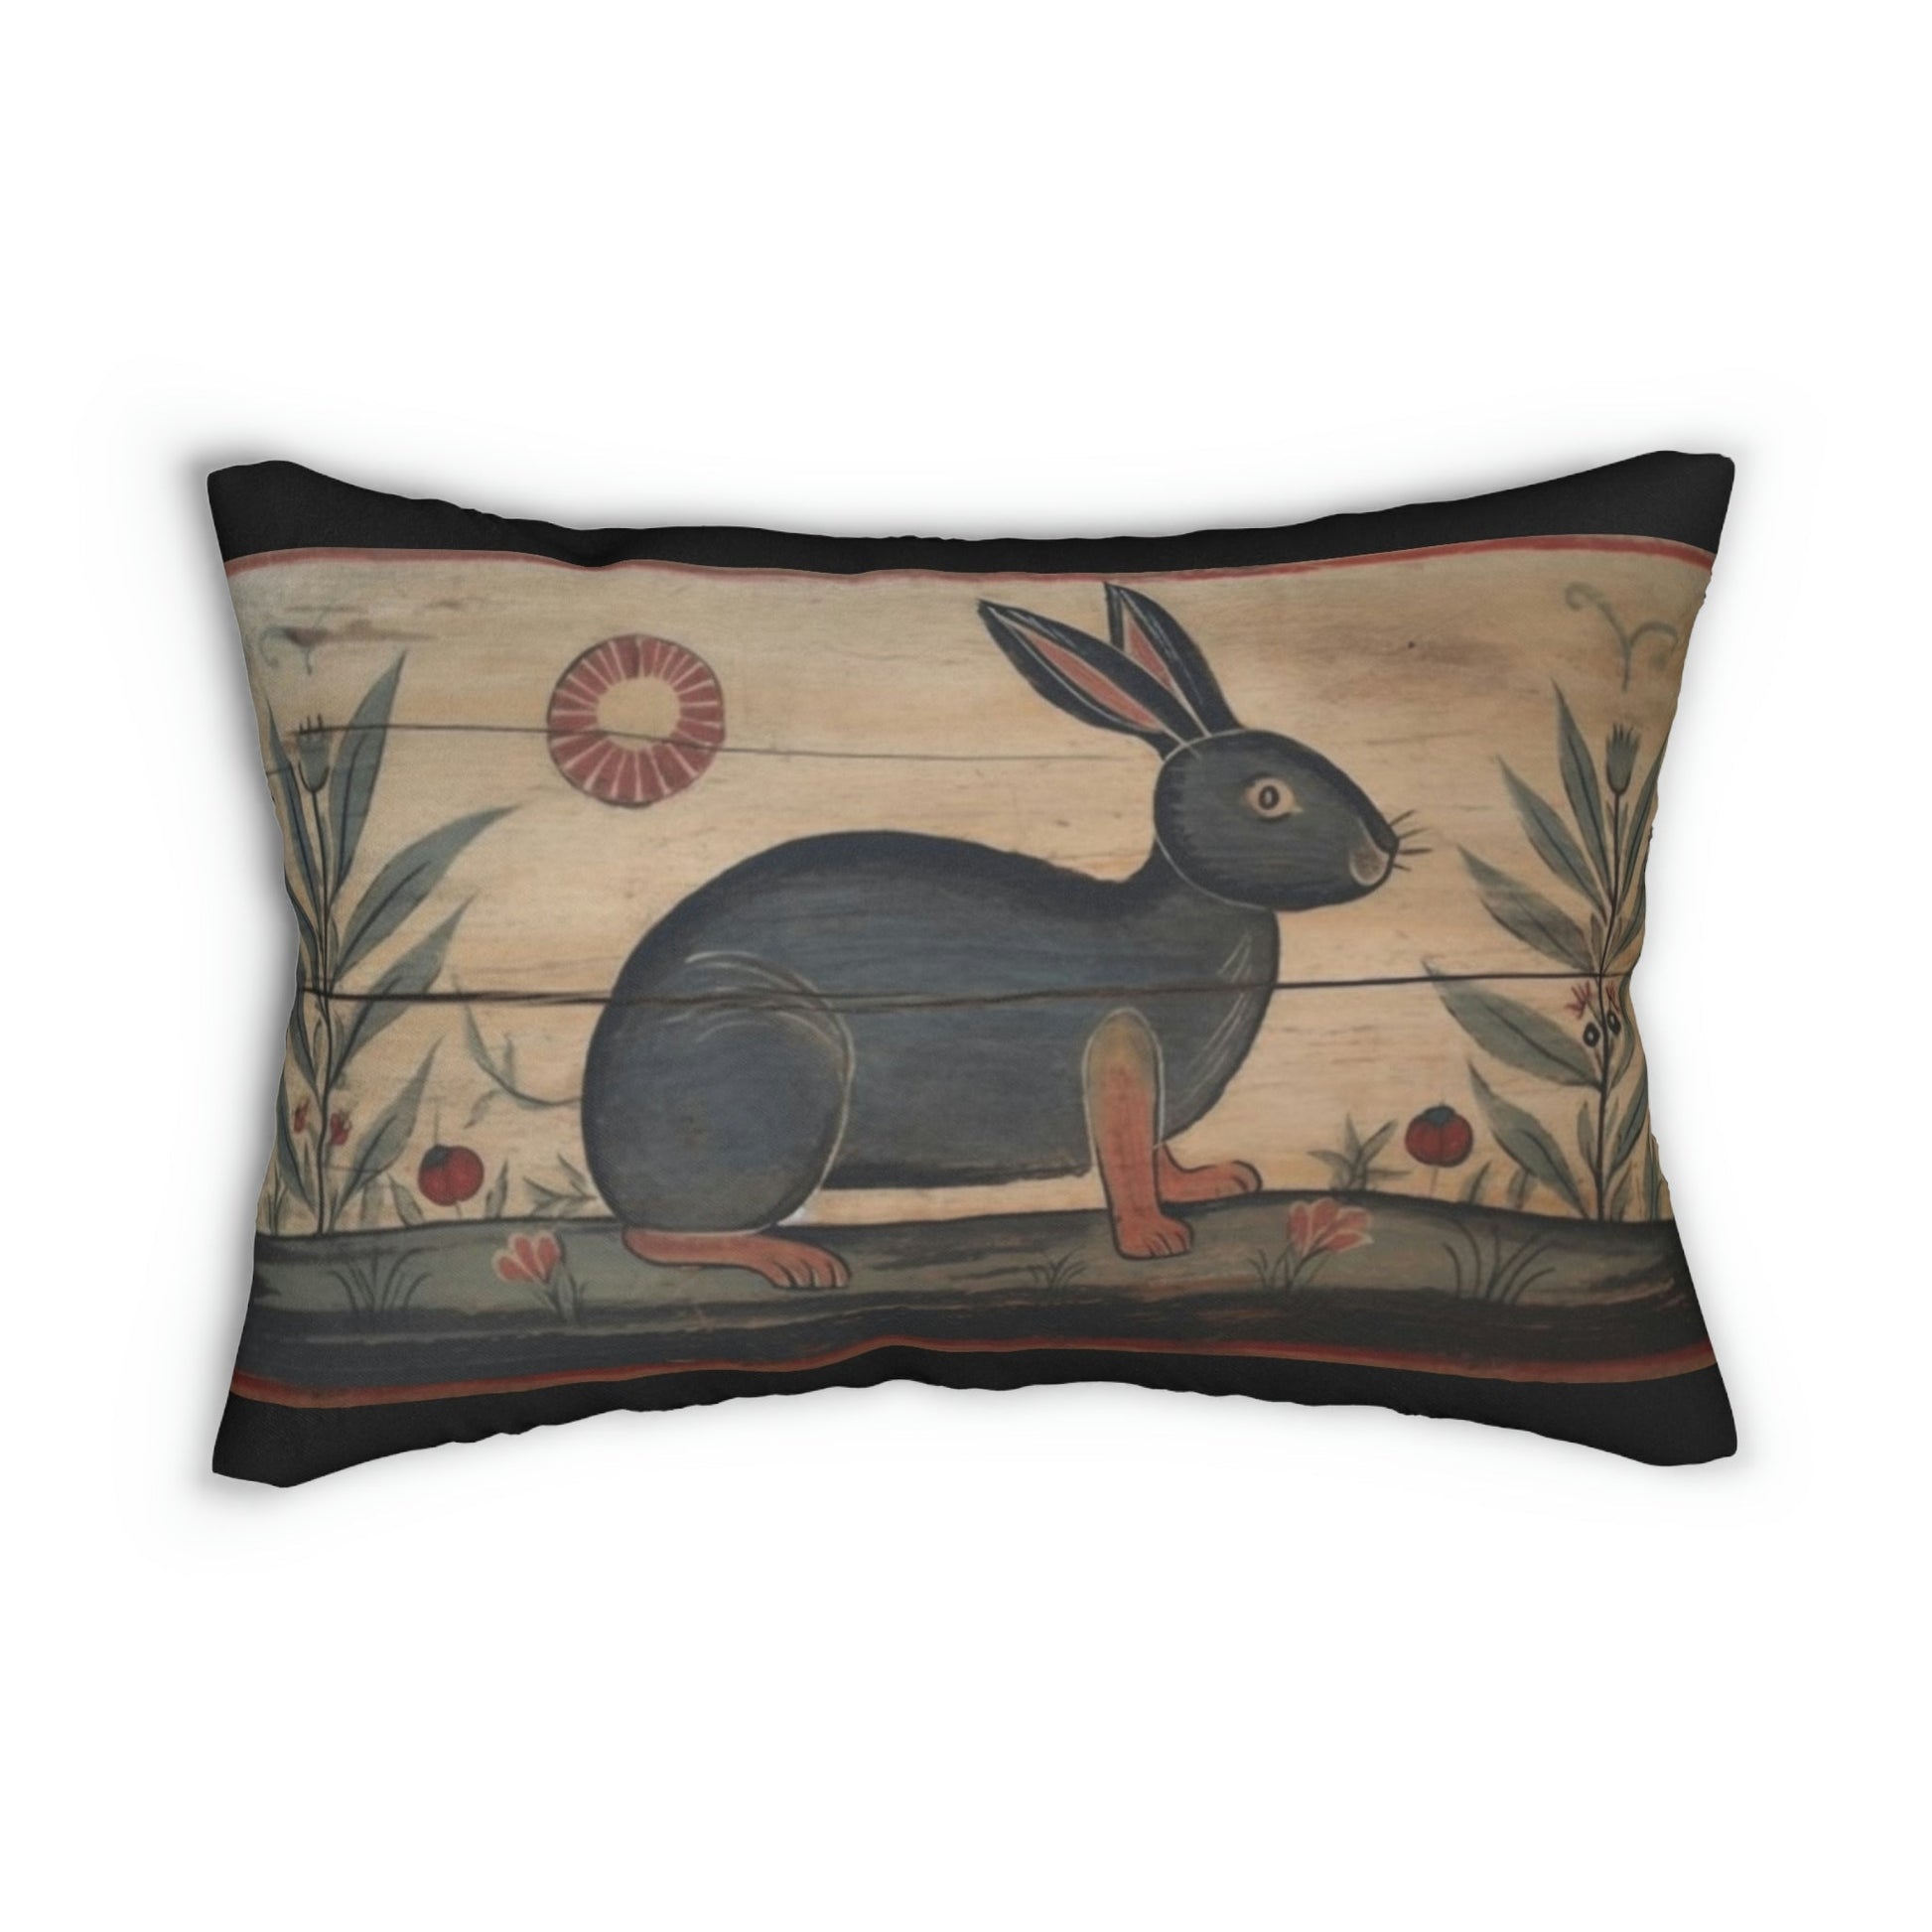 Folk Art Rabbit Lumbar Pillow - Perfect Gift for Farmers and People Who LOve Farm Animals